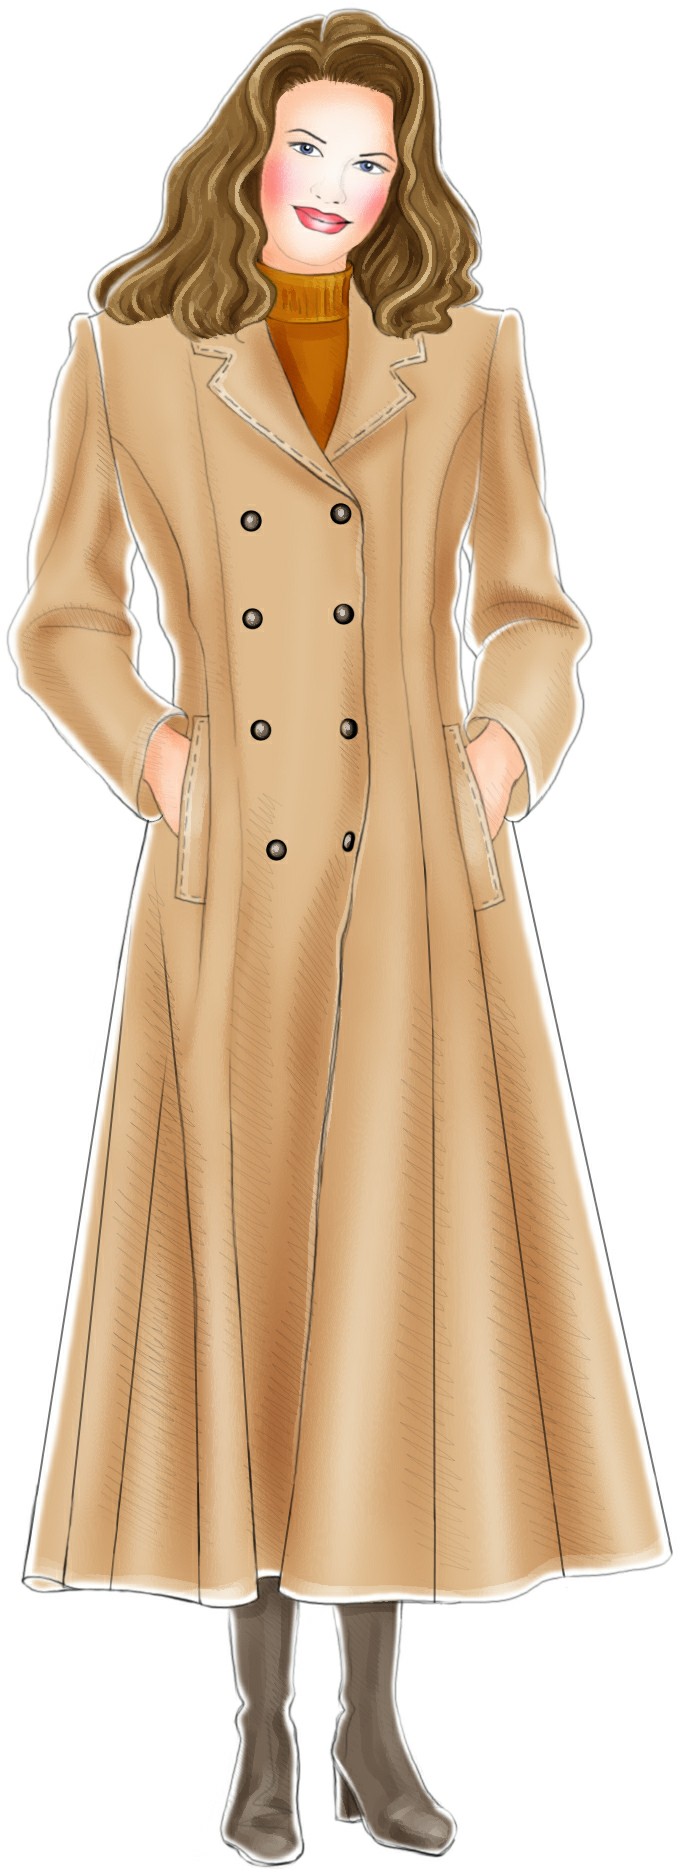 Long Coat With Shawl Collar - Sewing Pattern #5006. Made-to-measure ...